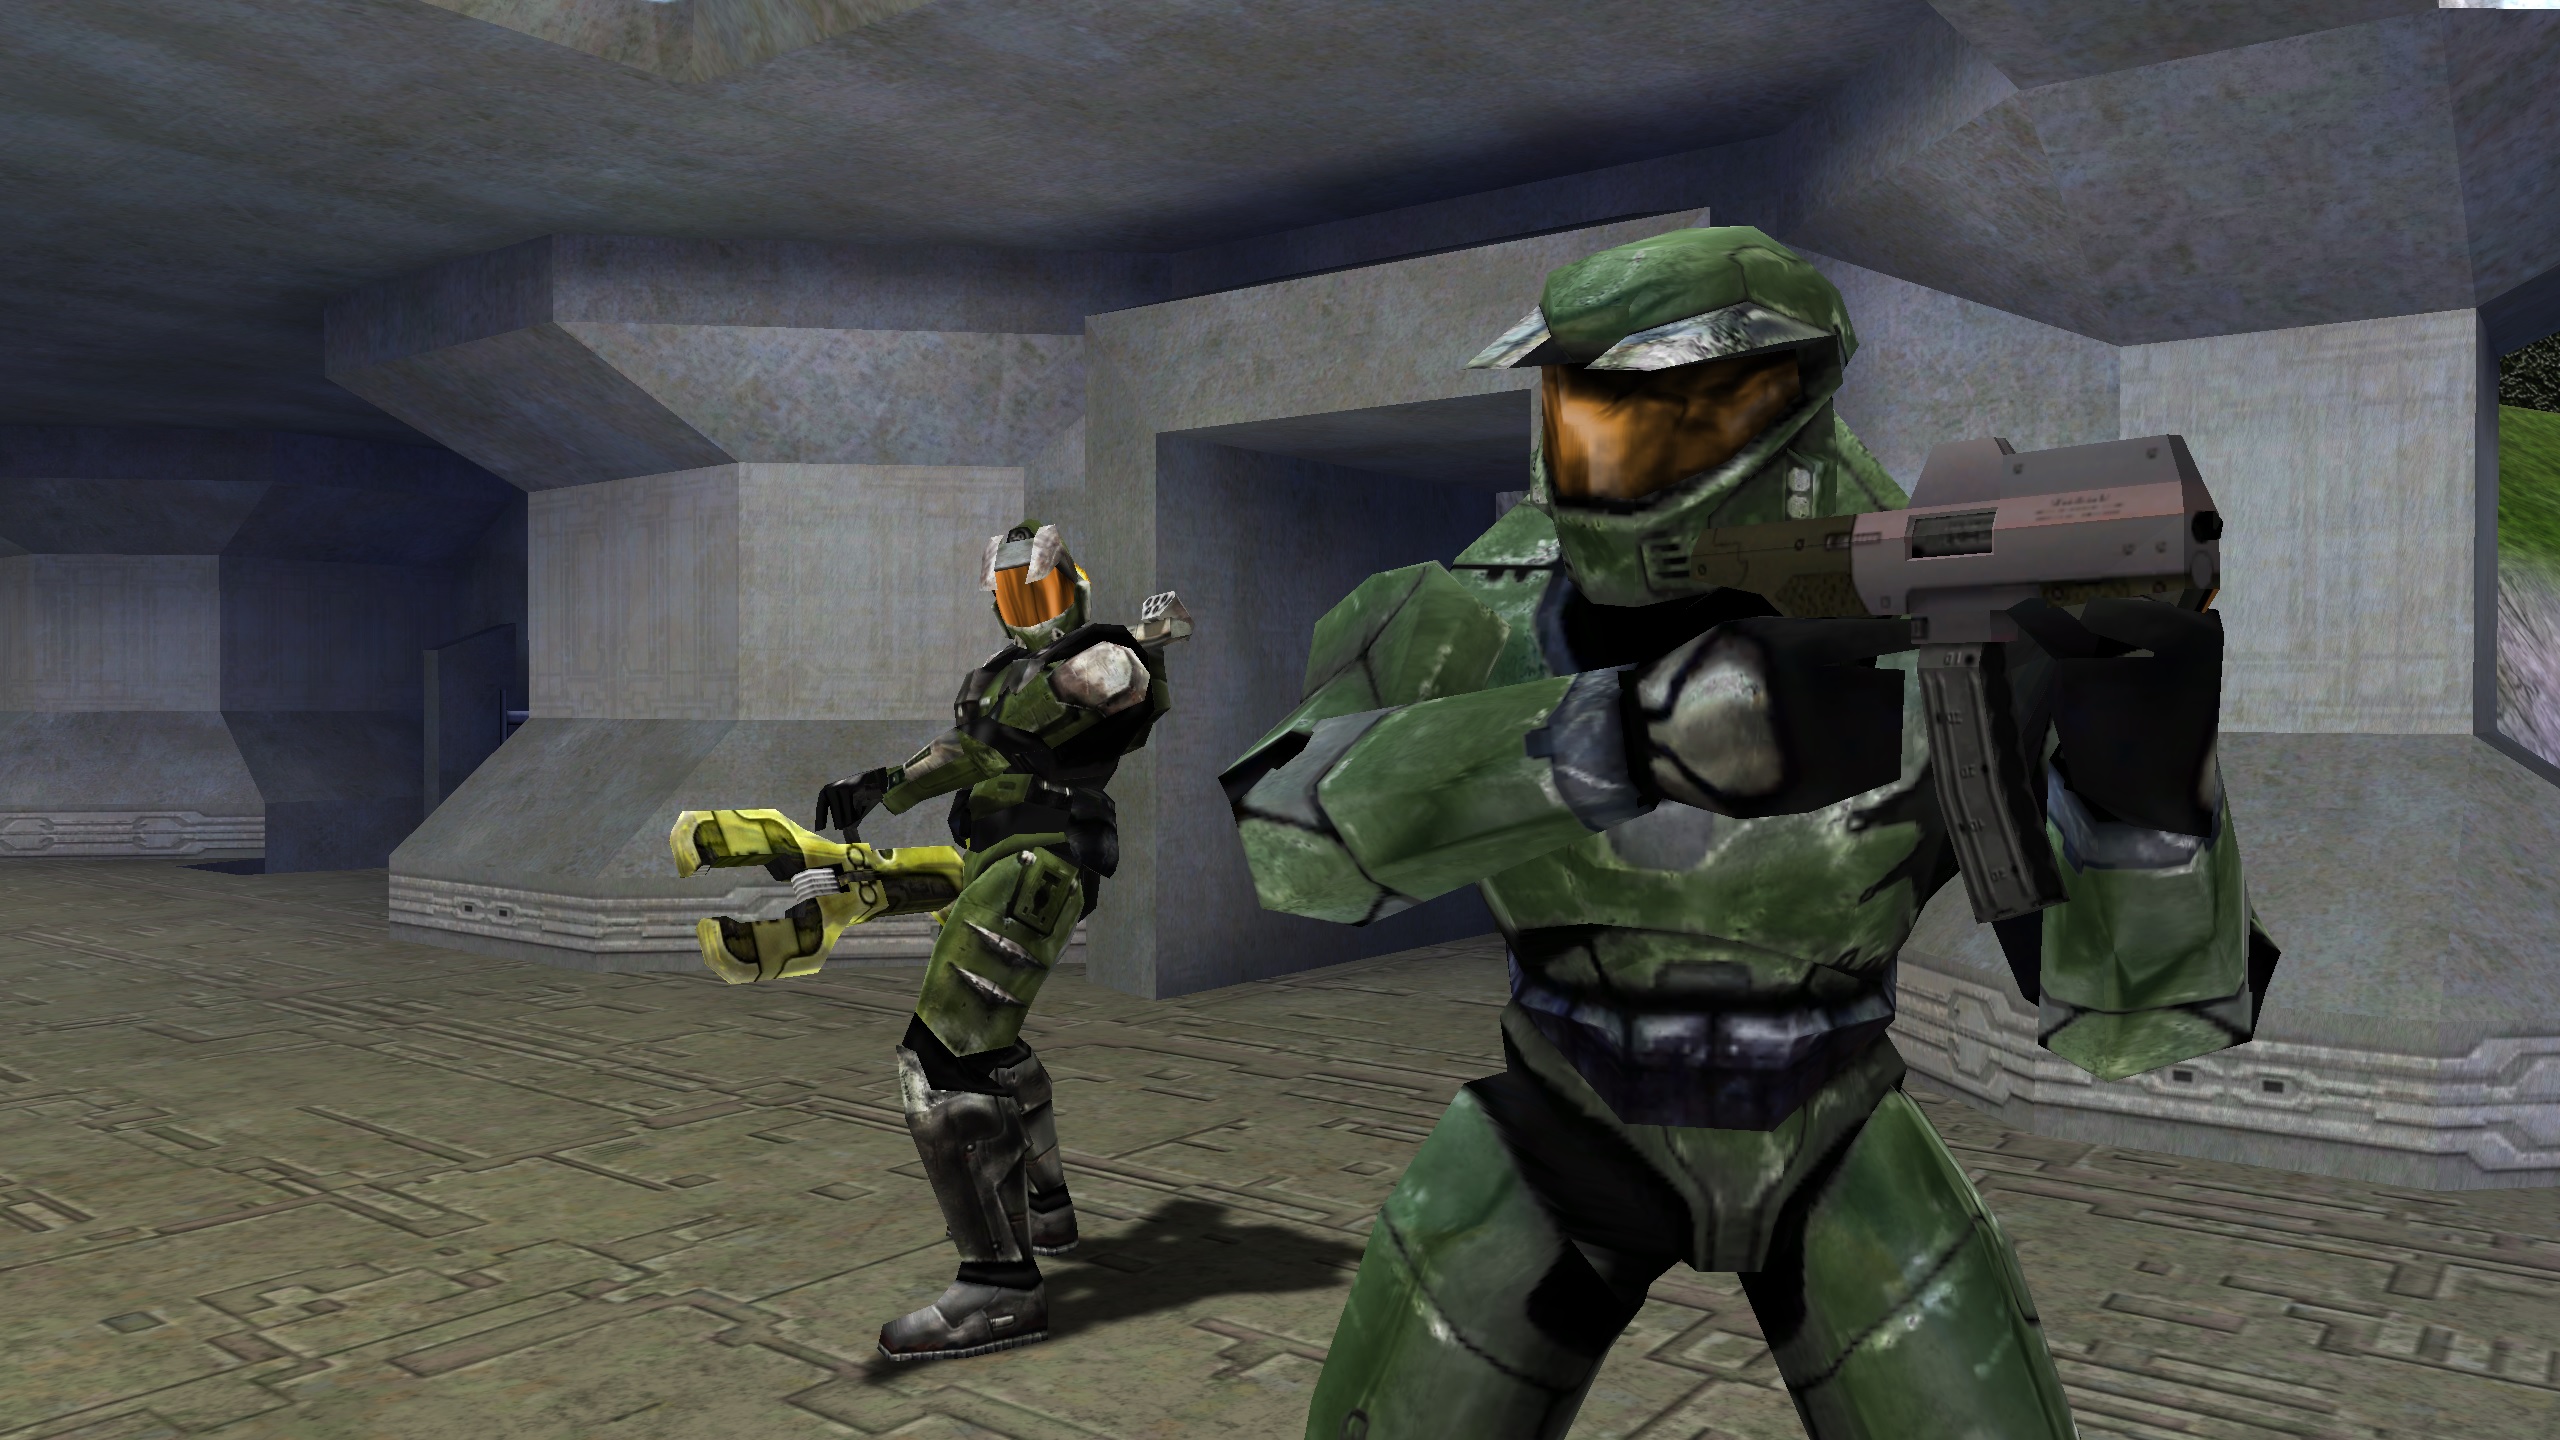 Halo CE shot of cyborg with gravity wrench and Spartan